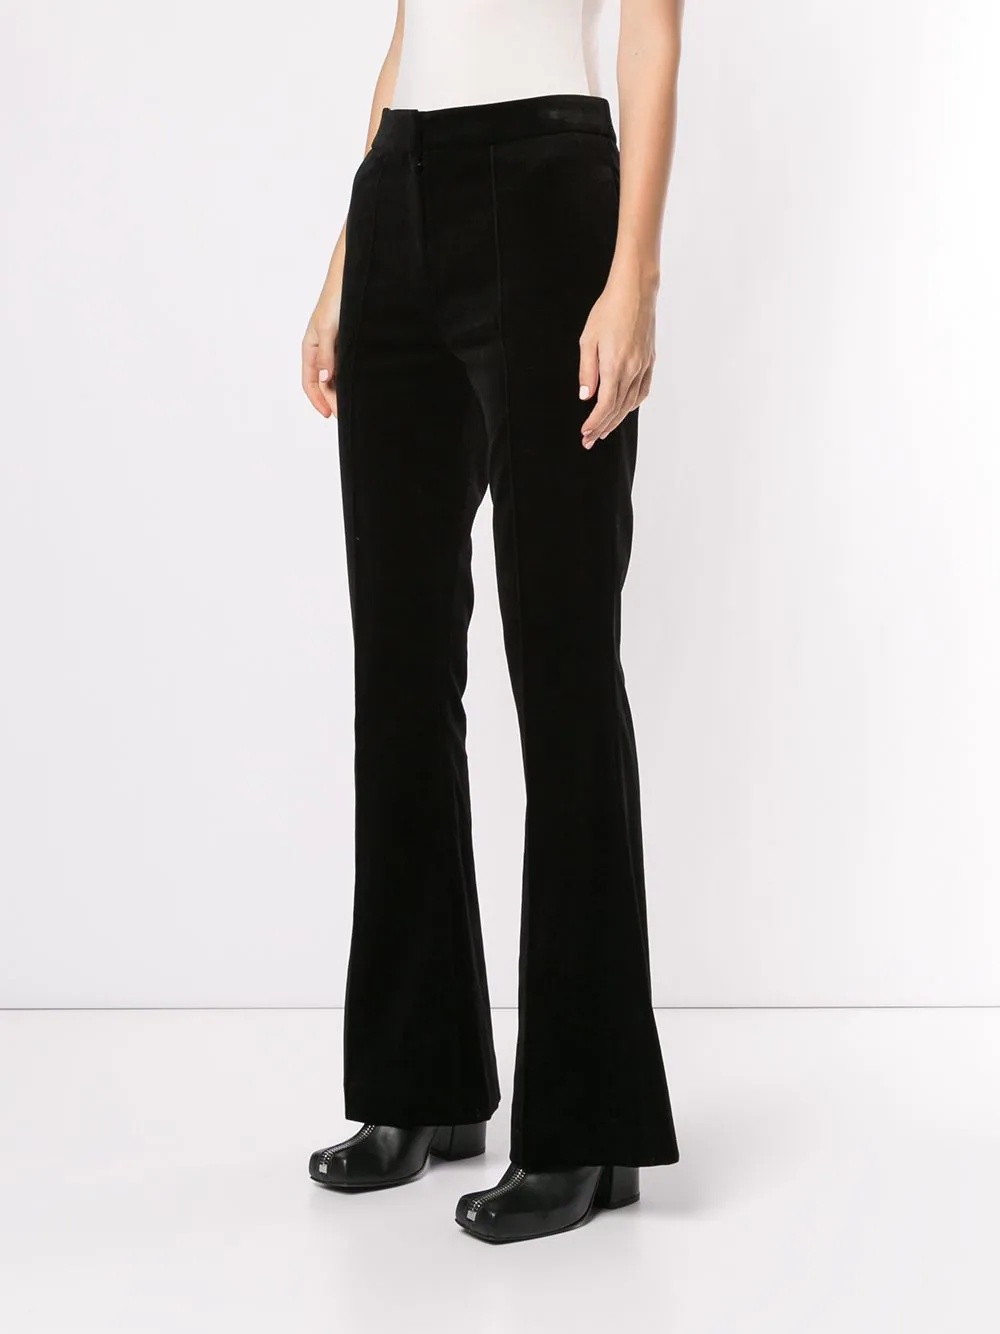 flared style trousers - 3